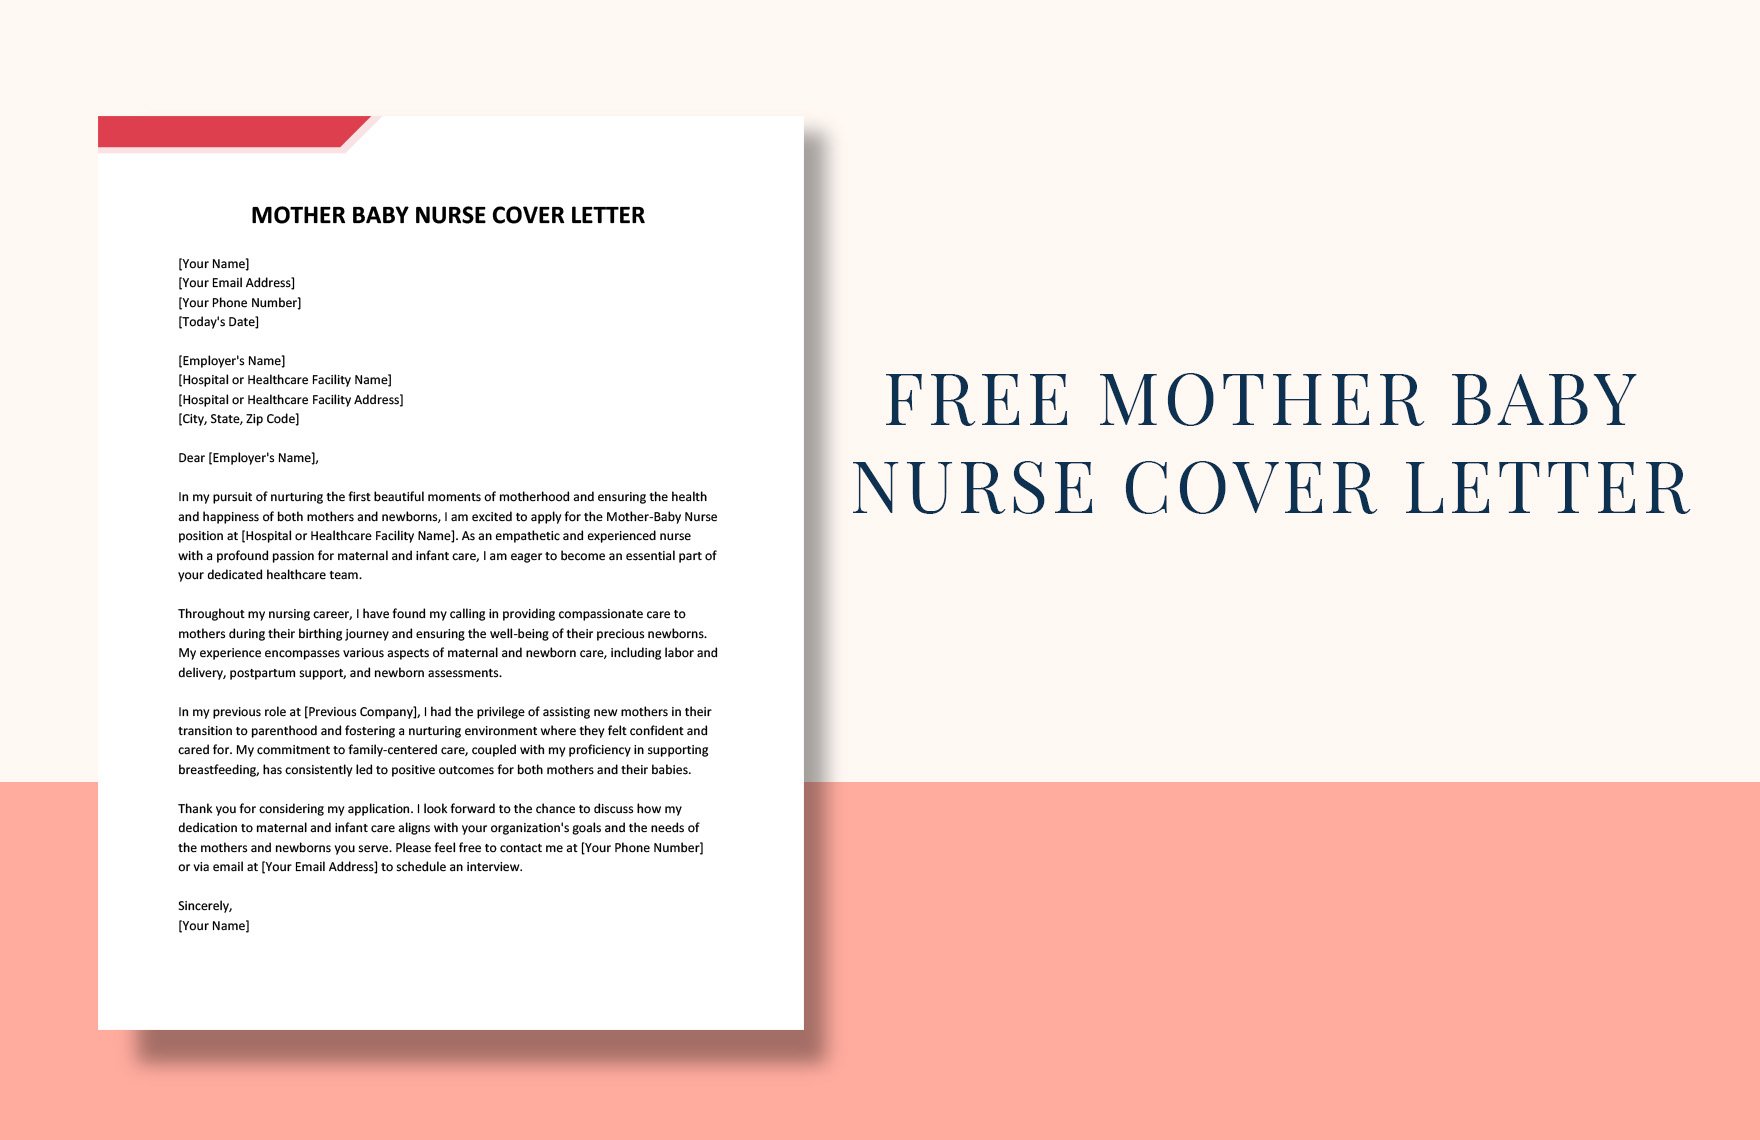 Mother Baby Nurse Cover Letter in Word, Google Docs